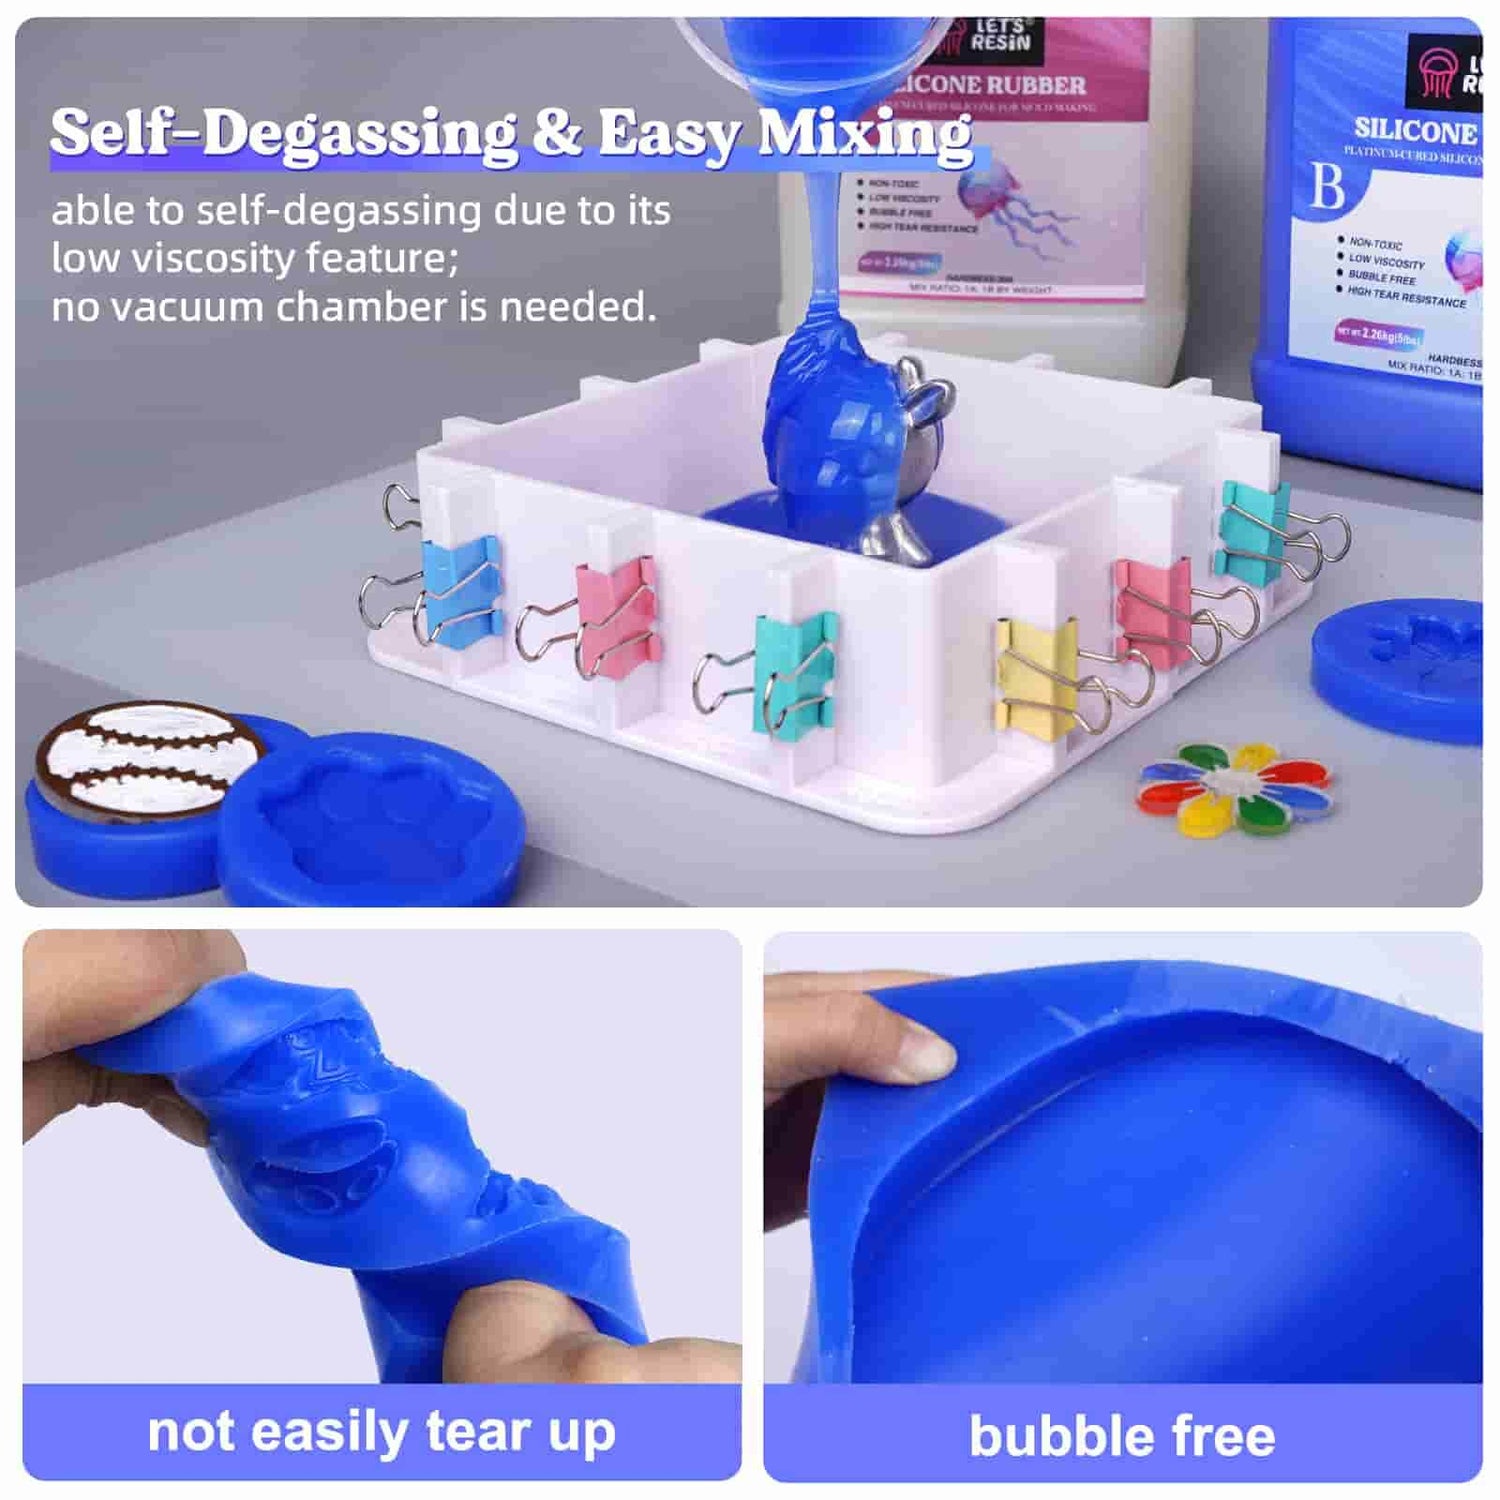 Silicone Mold Making Kit – Let's Resin